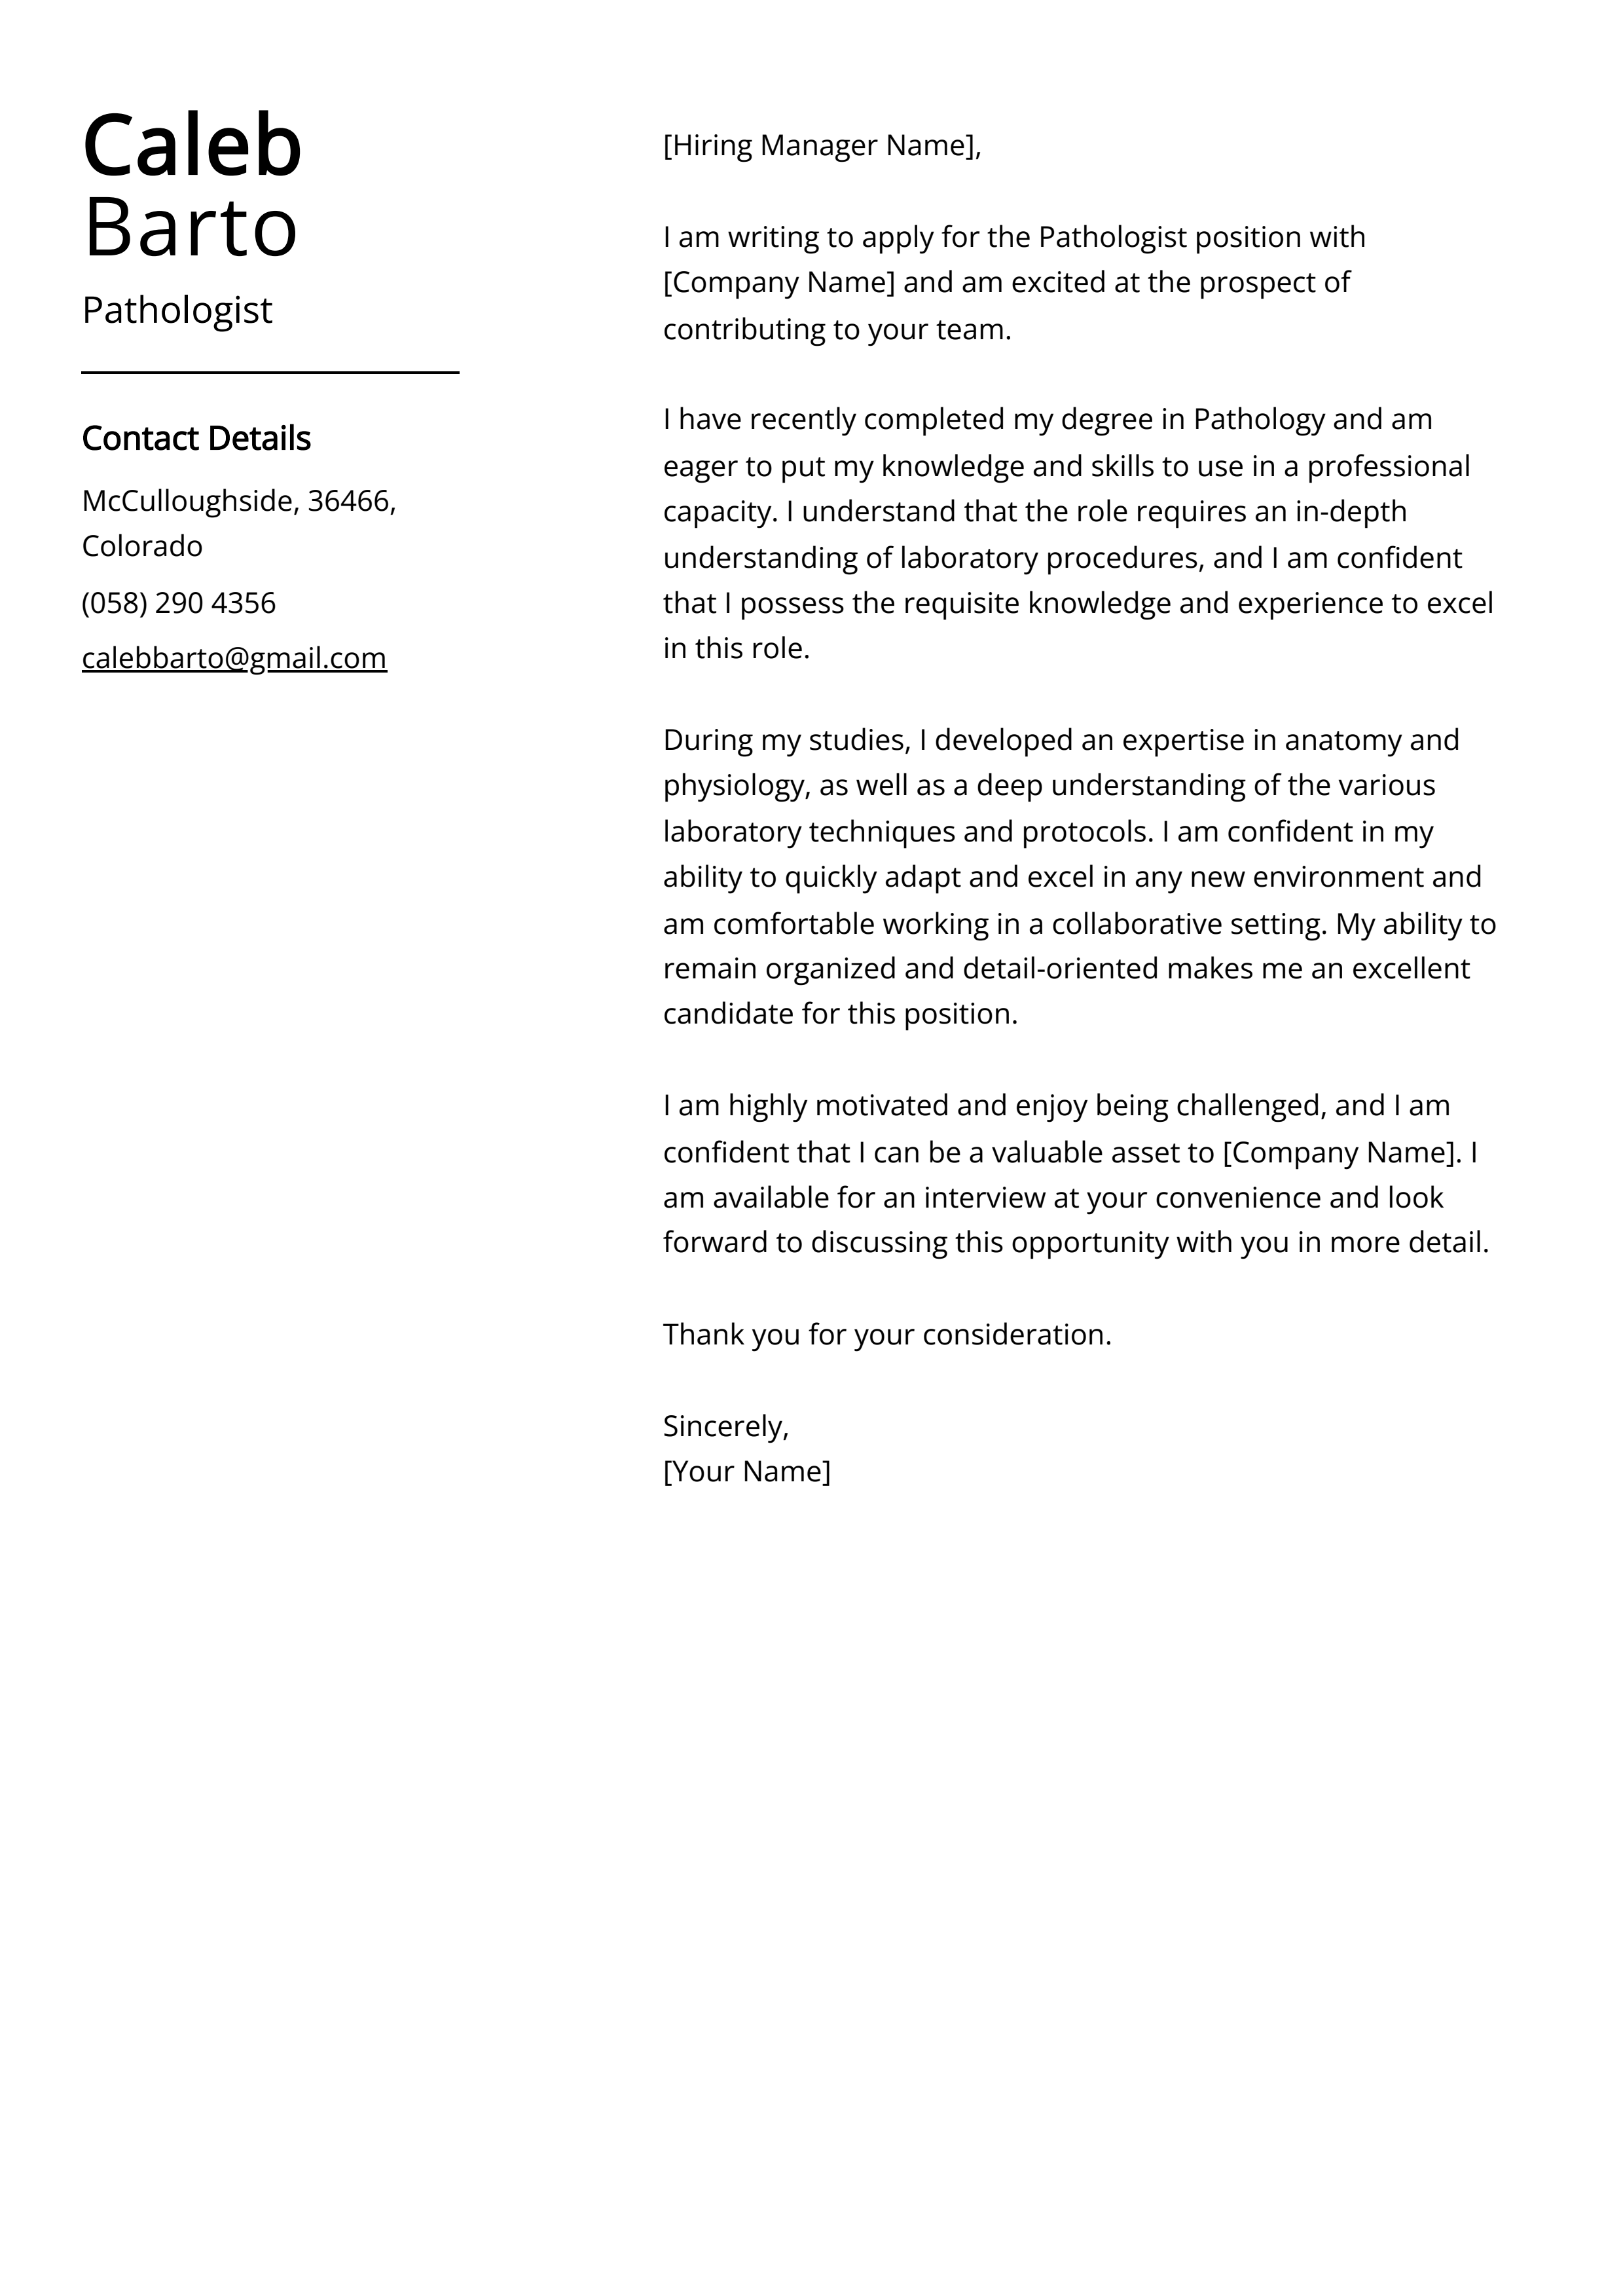 Pathologist Cover Letter Example